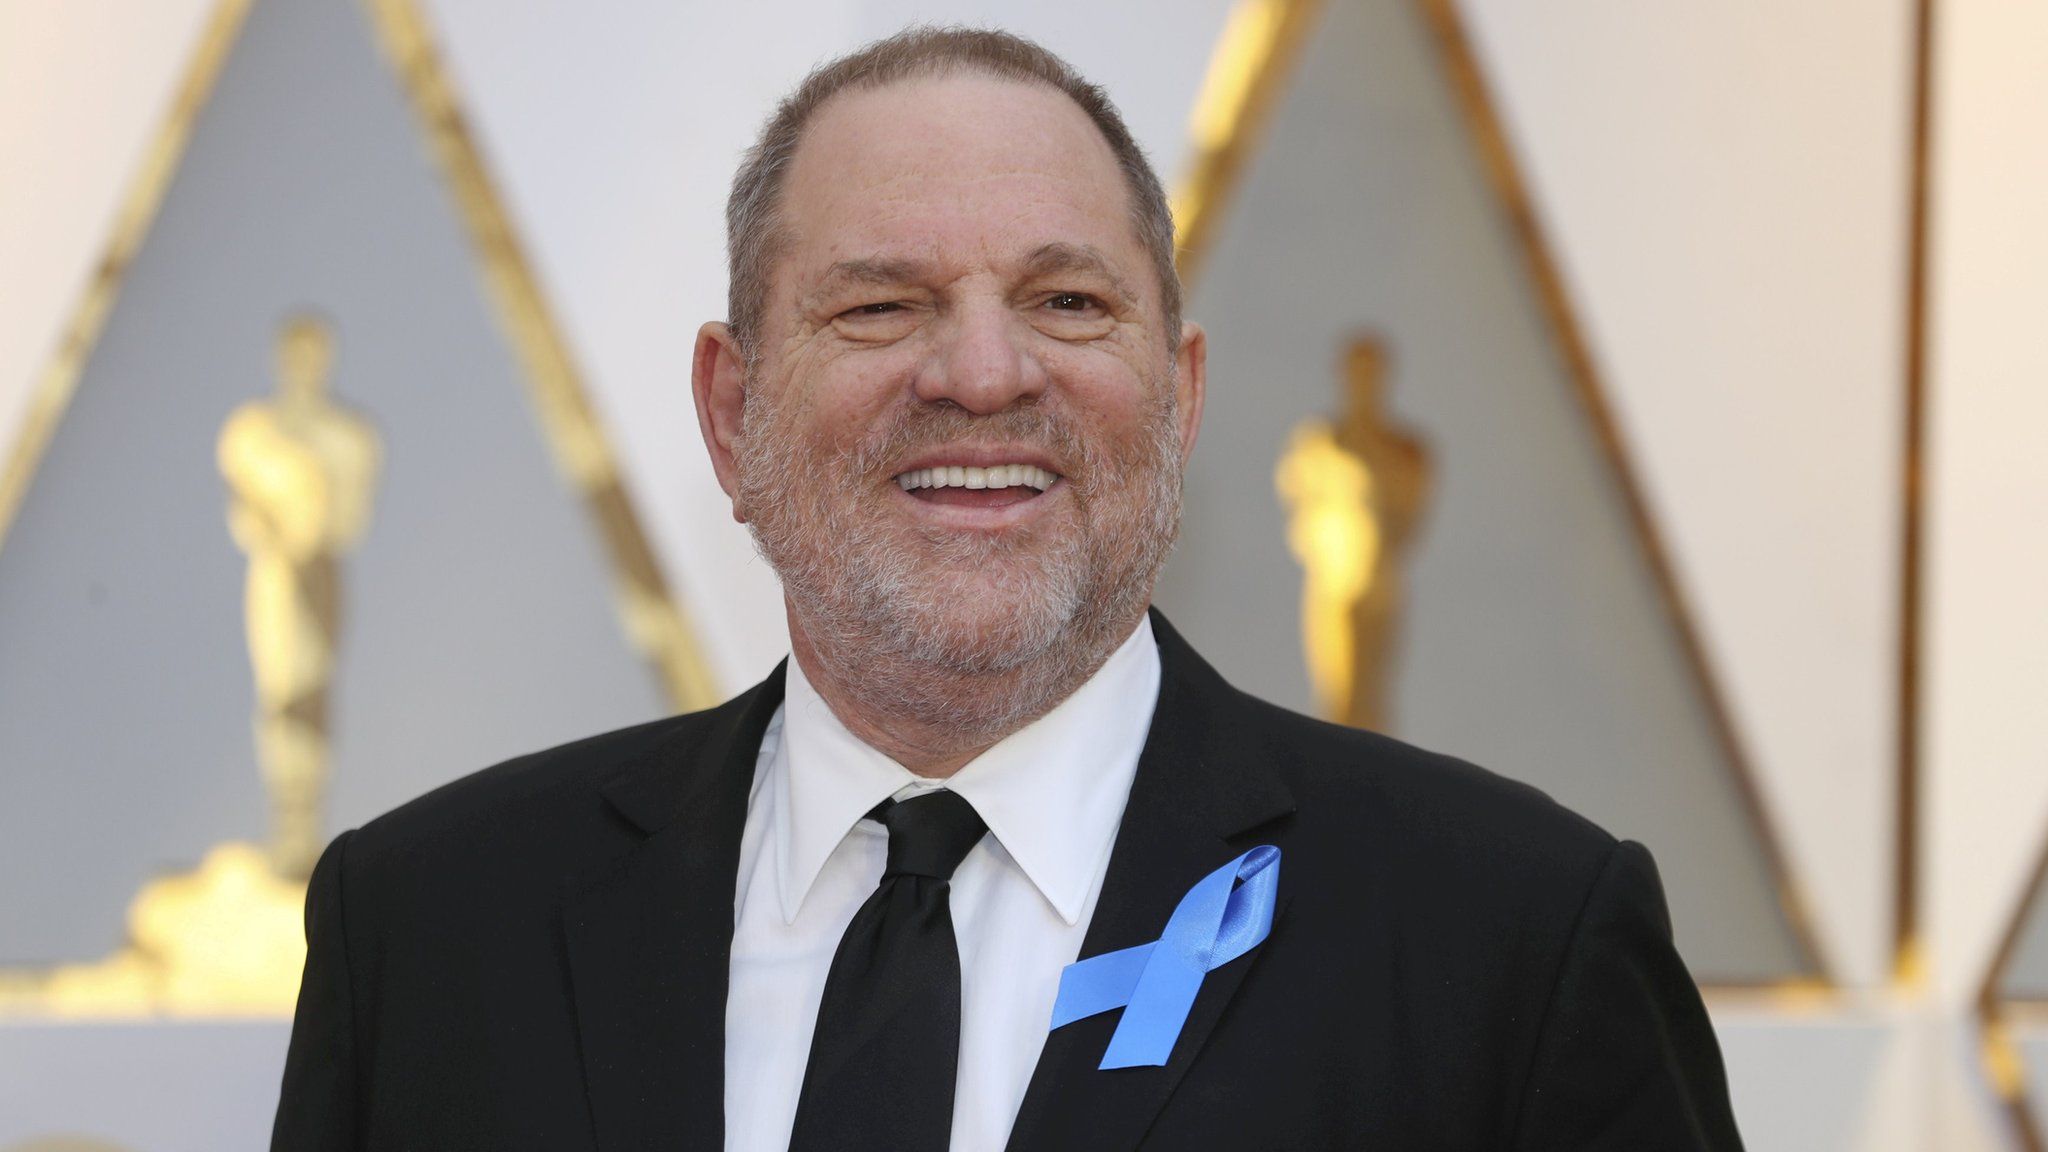 Harvey Weinstein poses on the Red Carpet after arriving at the 89th Academy Awards (Oscars) in Hollywood, California, U.S., February 26, 2017